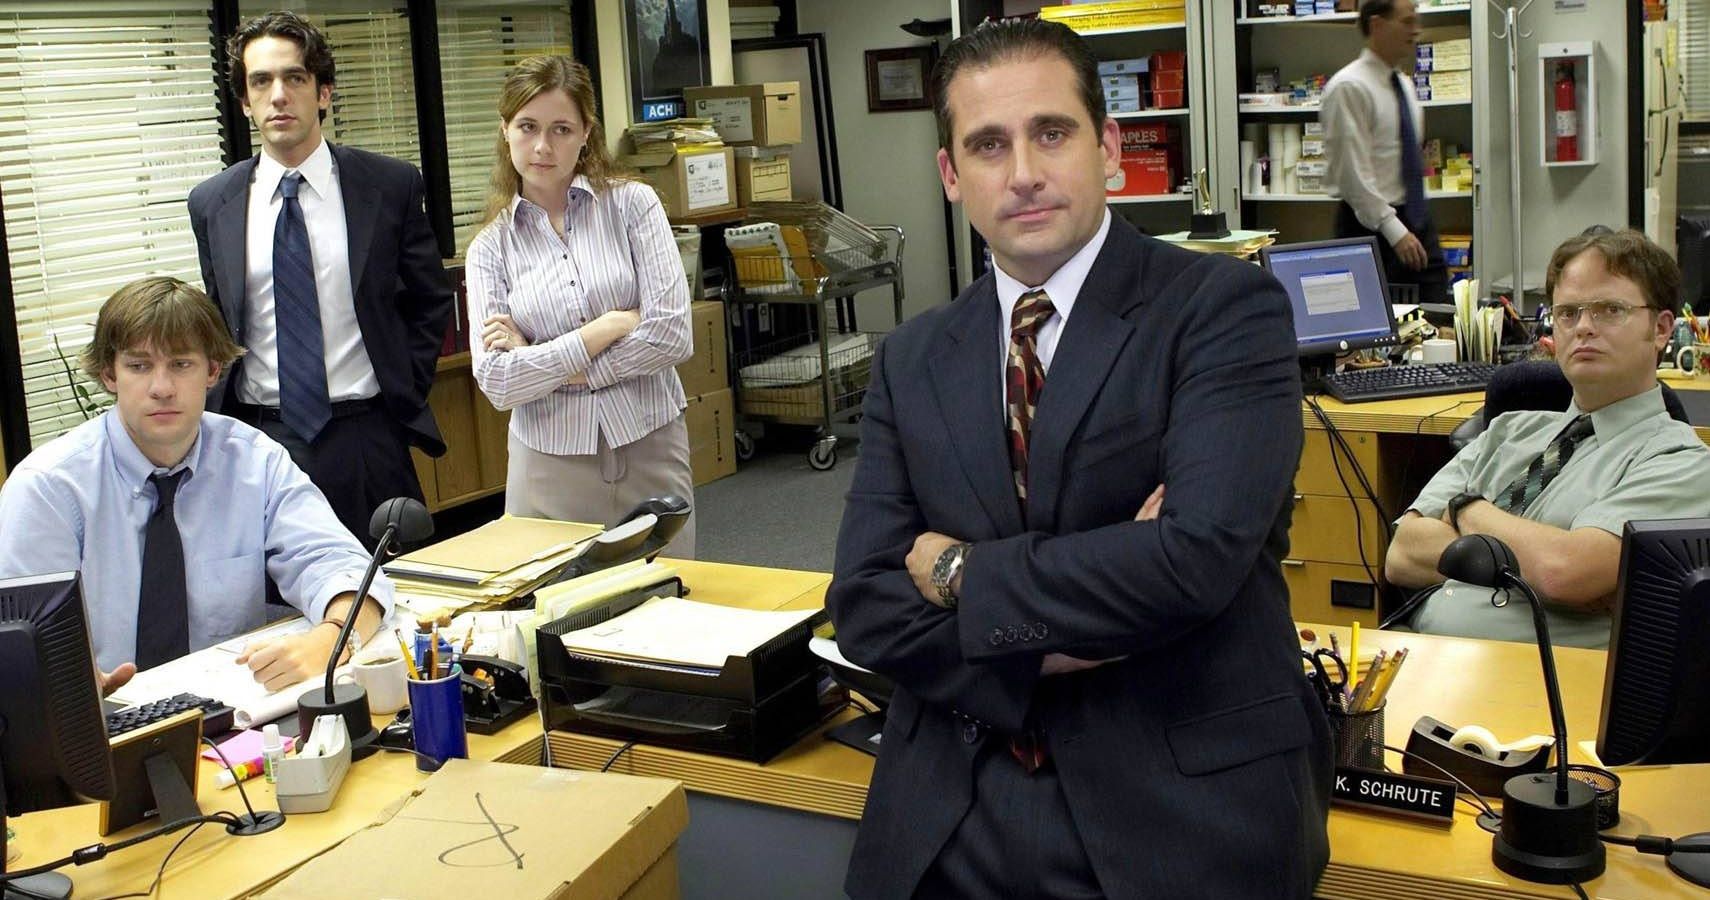 THE OFFICE-TV